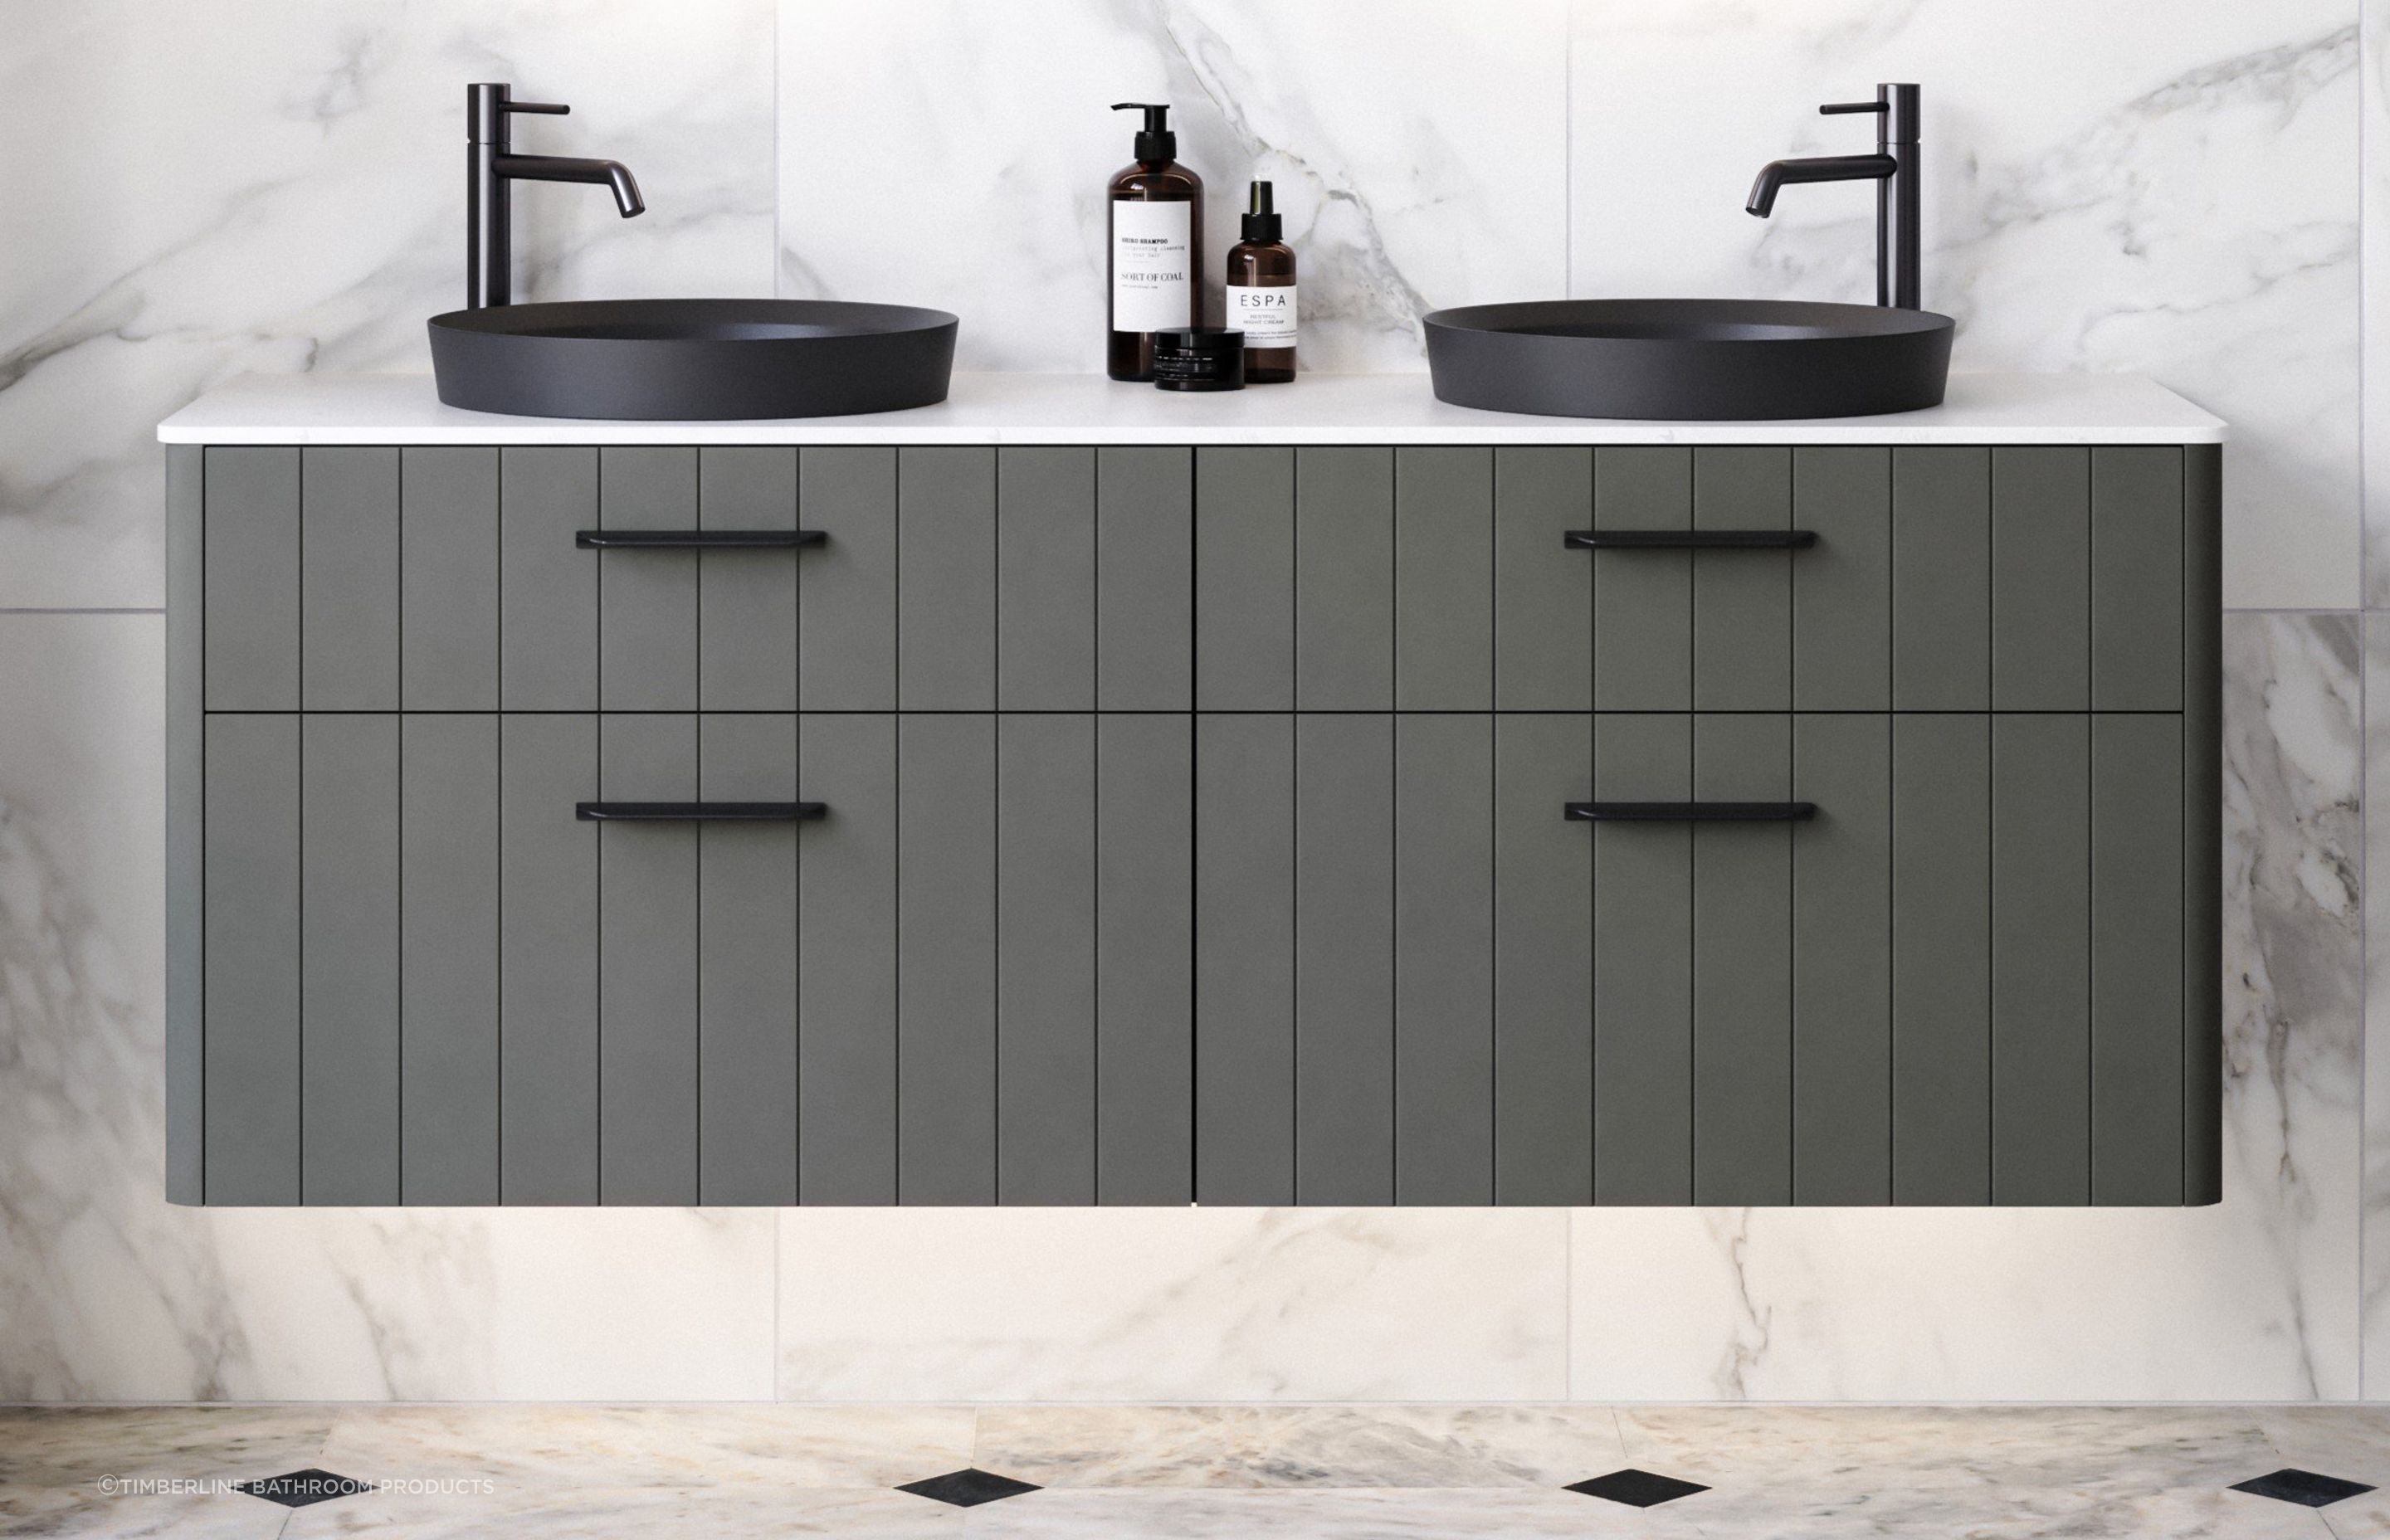 A new bathrom vanity can be an essential part of a wider bathroom renovation project